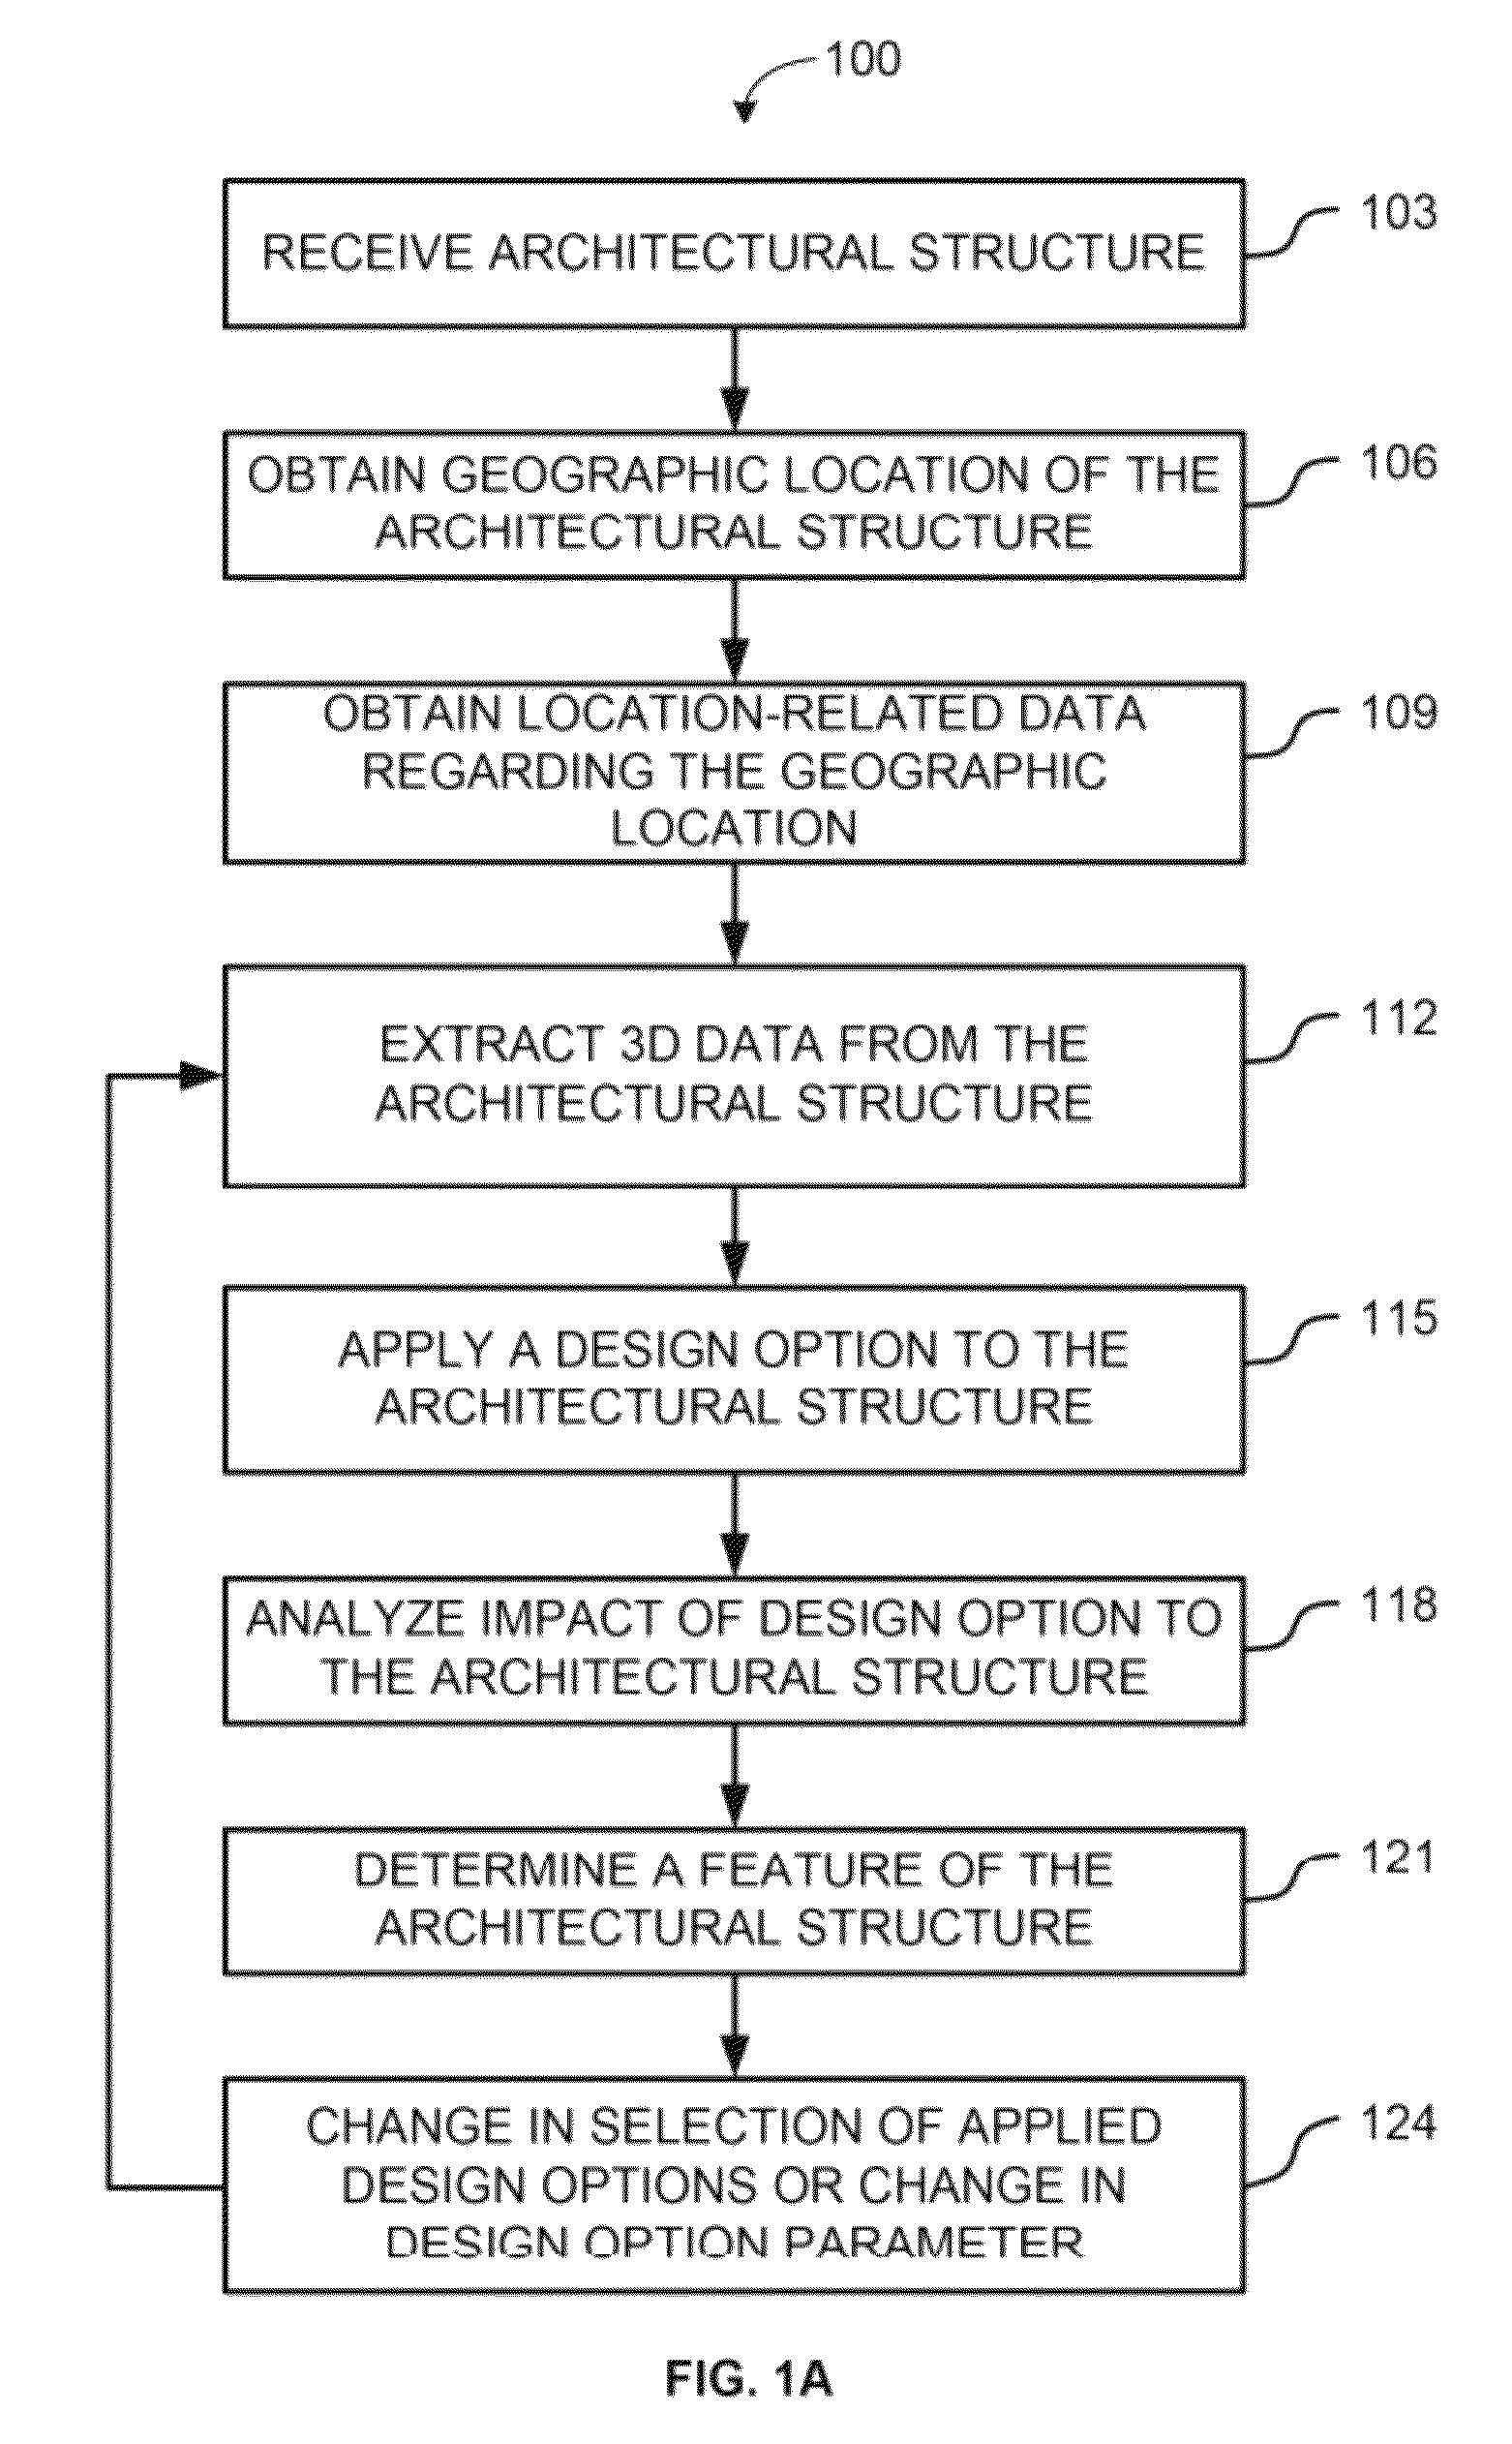 System and method for analyzing and designing an architectural structure using bundles of design strategies applied according to a priority